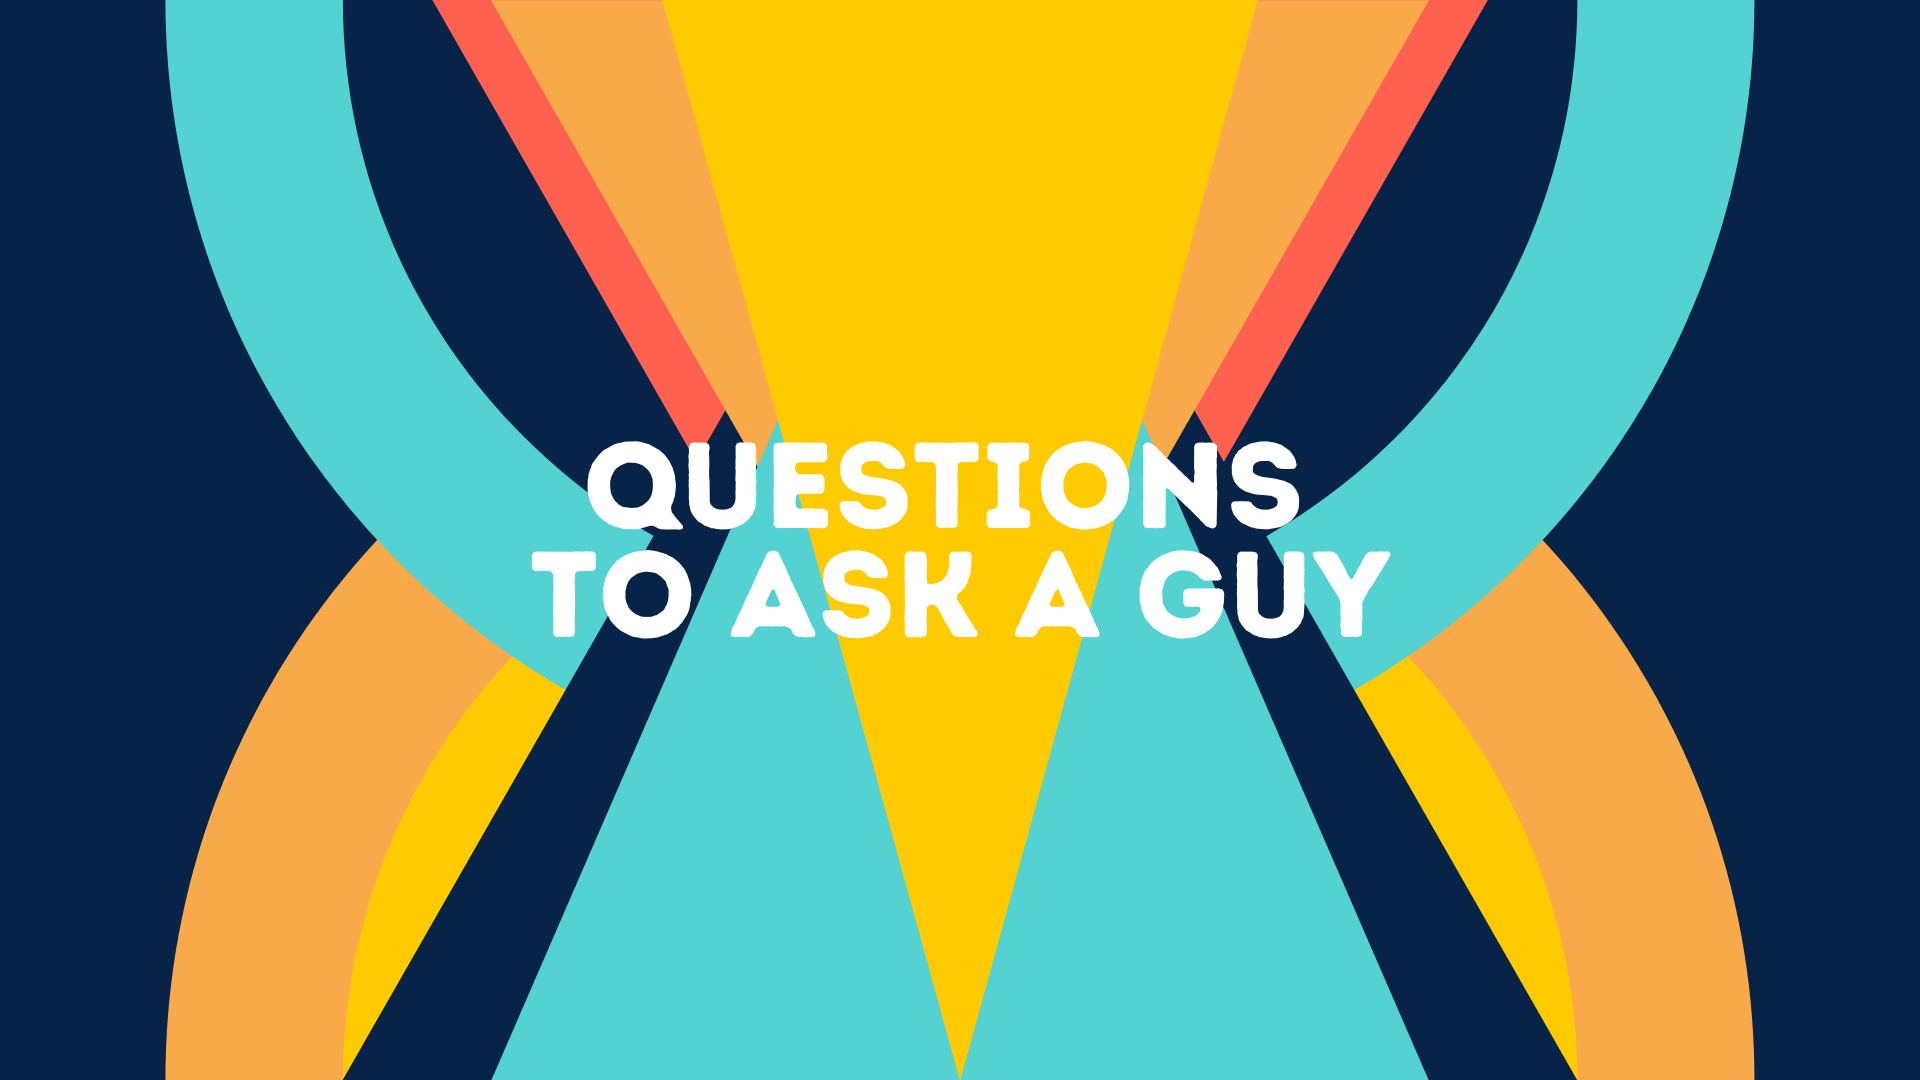 200 Questions to Ask a Guy - The best list out there